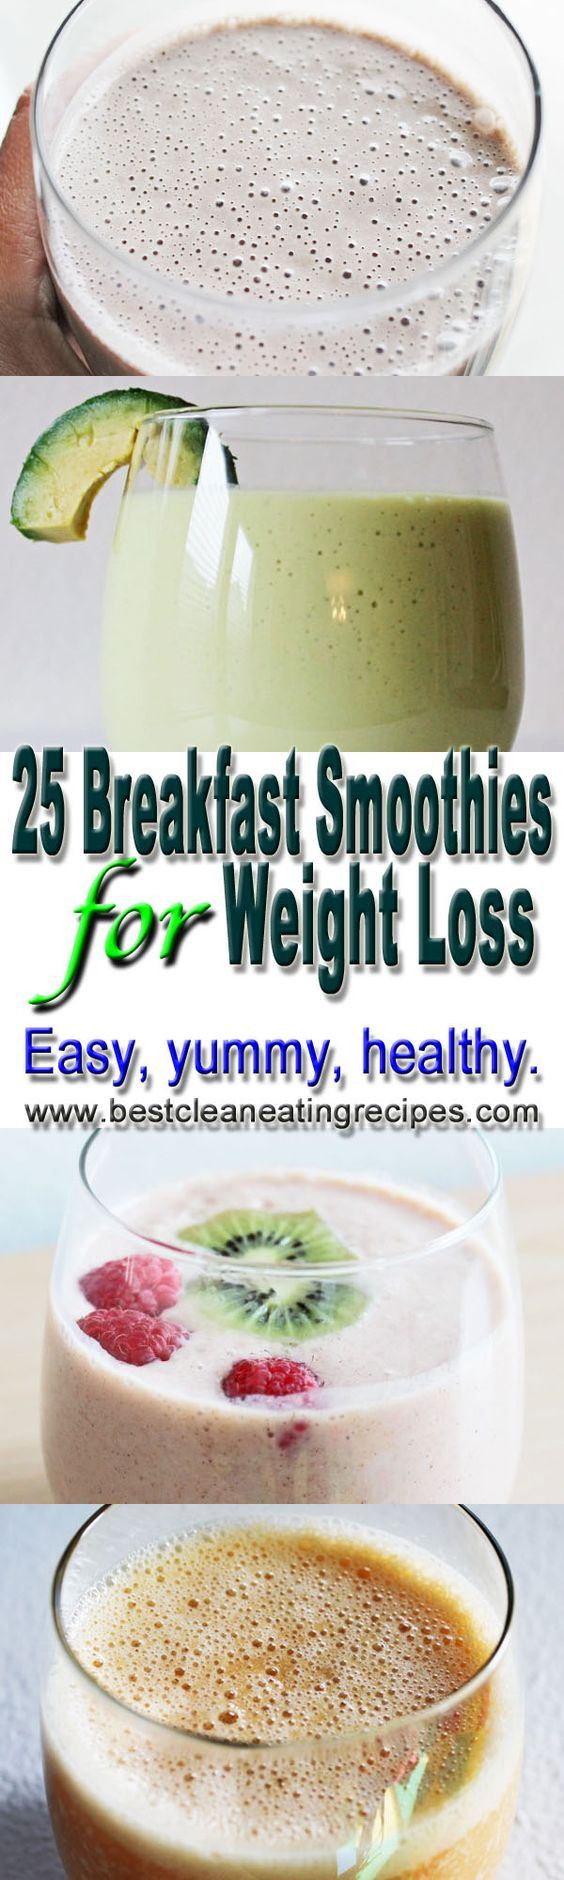 Easy Healthy Smoothie Recipes For Weight Loss
 Pinterest • The world’s catalog of ideas